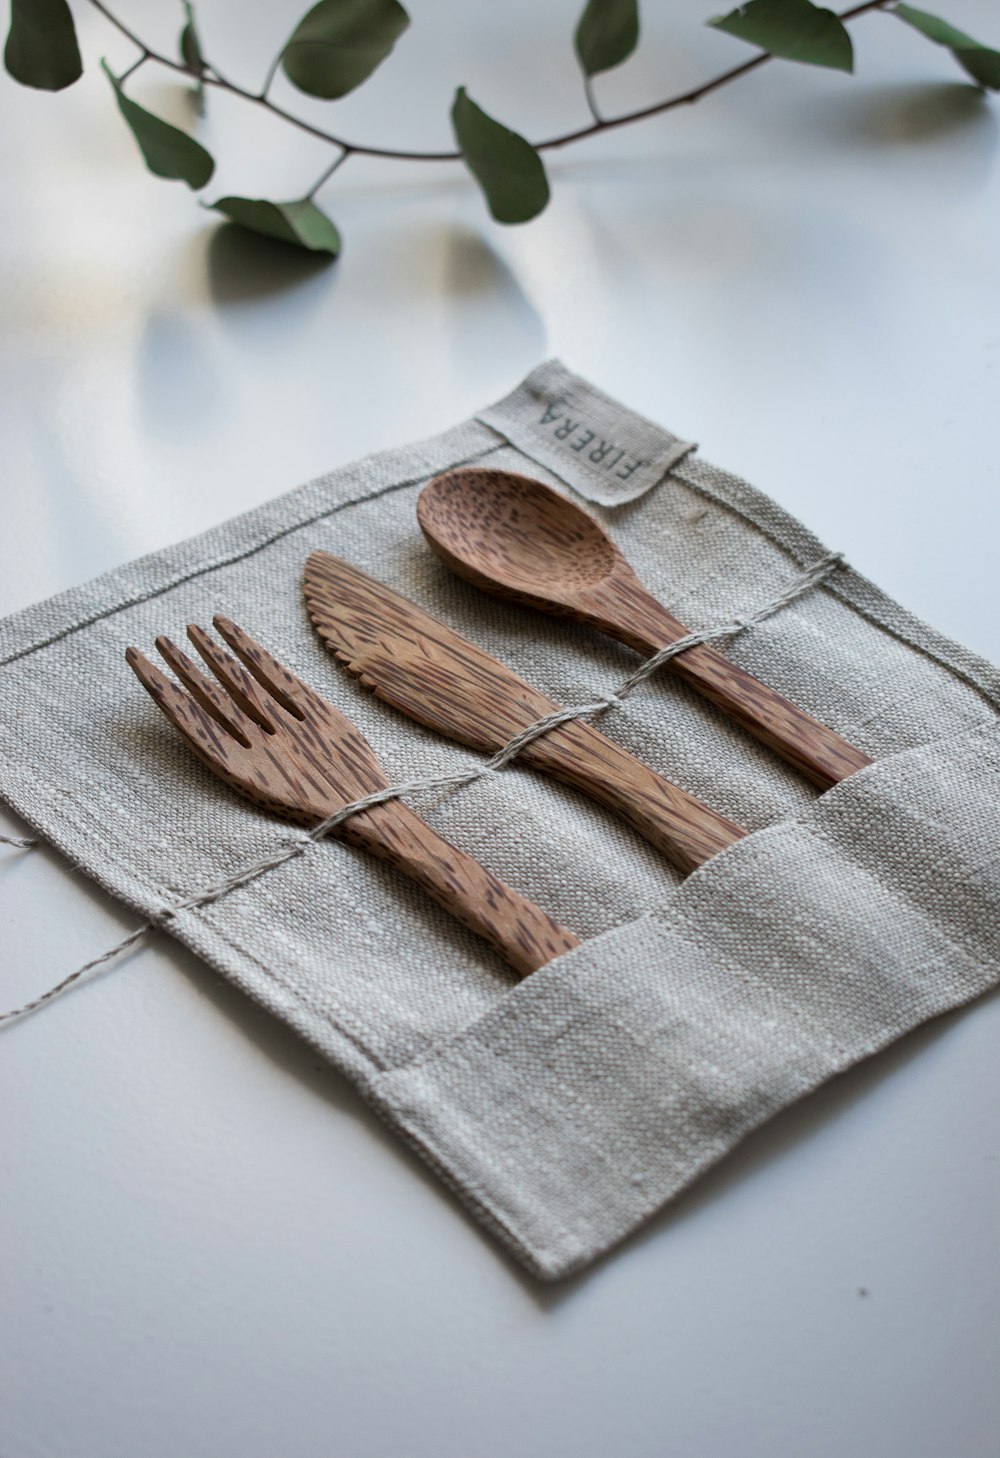 brown wooden fork, spoon, and knife on textile